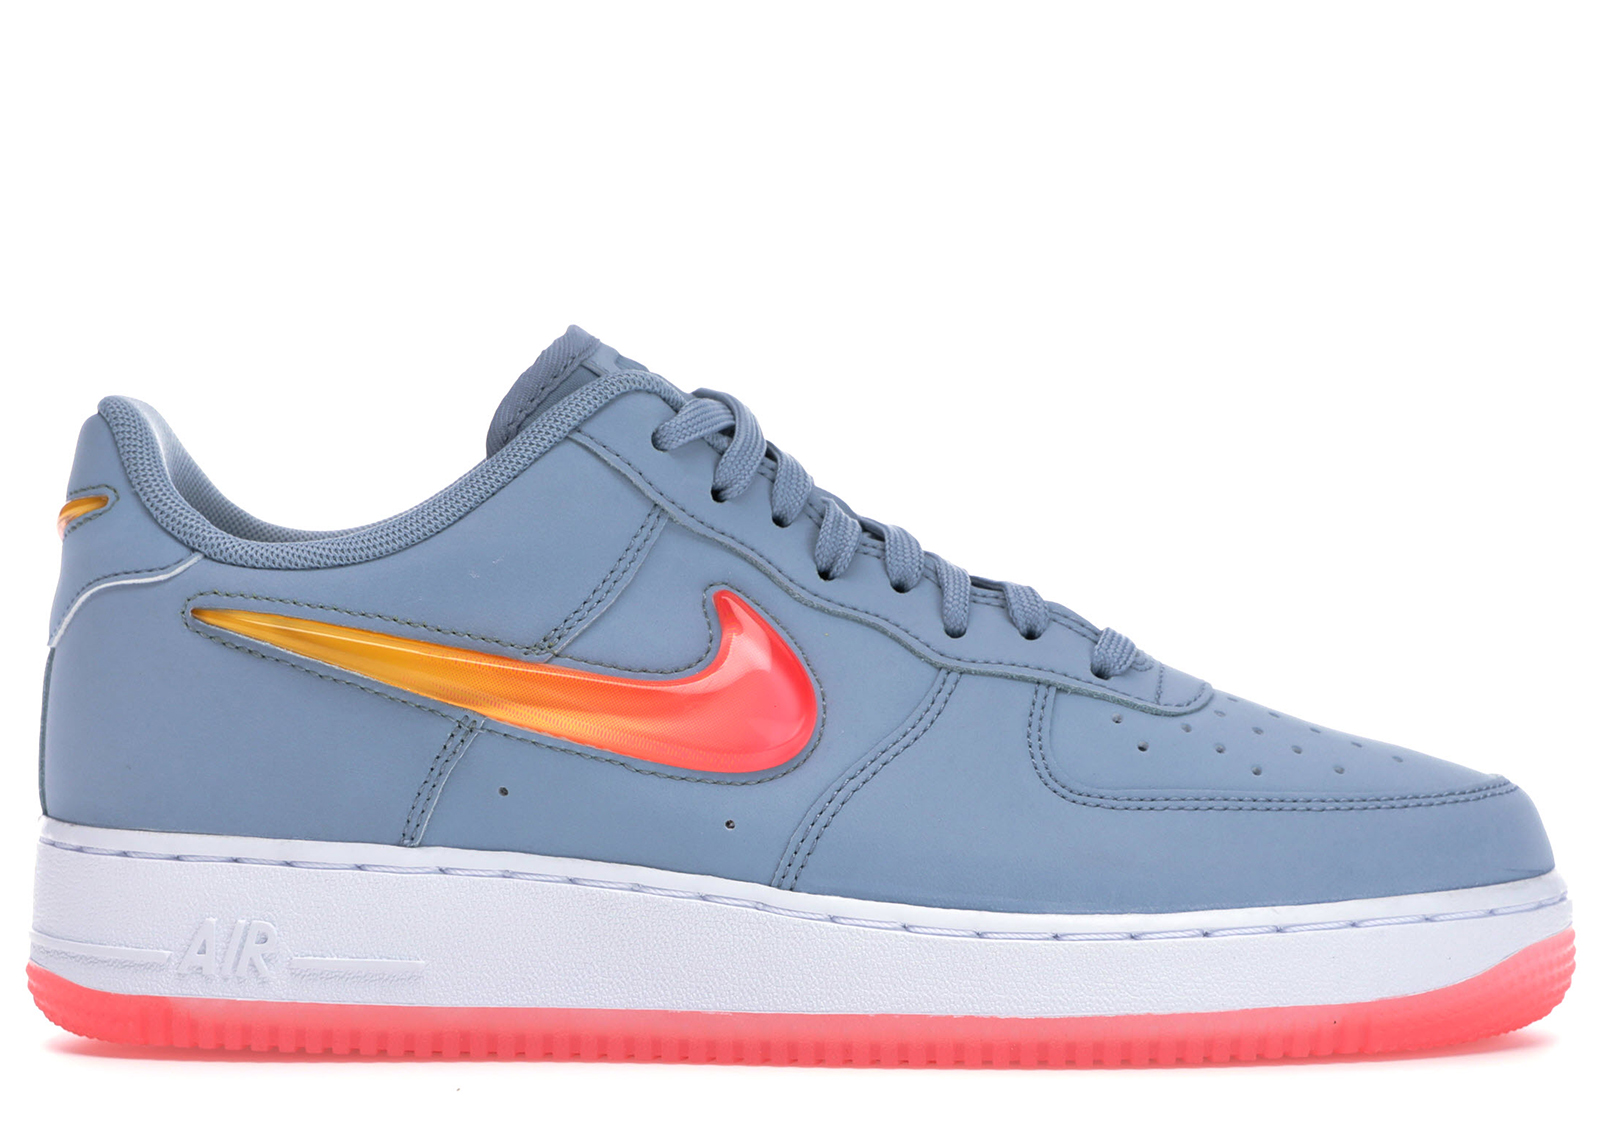 Nike Air Force 1 Low Jelly Jewel Obsidian Mist Men's - AT4143-400 - US